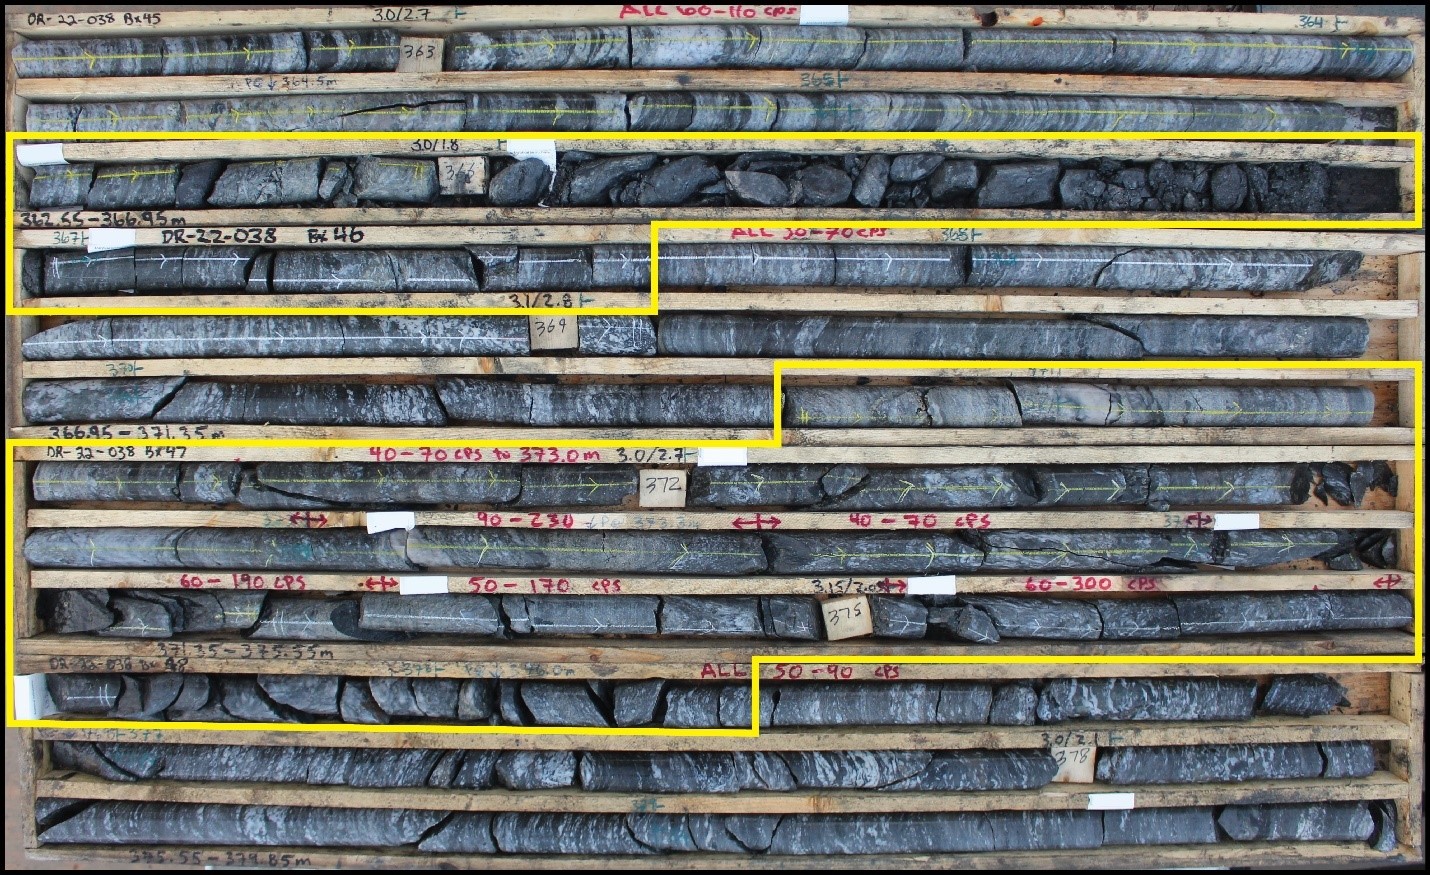 Elevated radioactivity within the lower shear zone of stacked graphitic structures intersected in DR-22-038 (yellow outlines); Up to 300 cps. Strong reactivation is evident through the structures, indicated by formation of fault gouge and brecciation. Sericitic alteration is present throughout the zones in addition to smoky quartz veins.